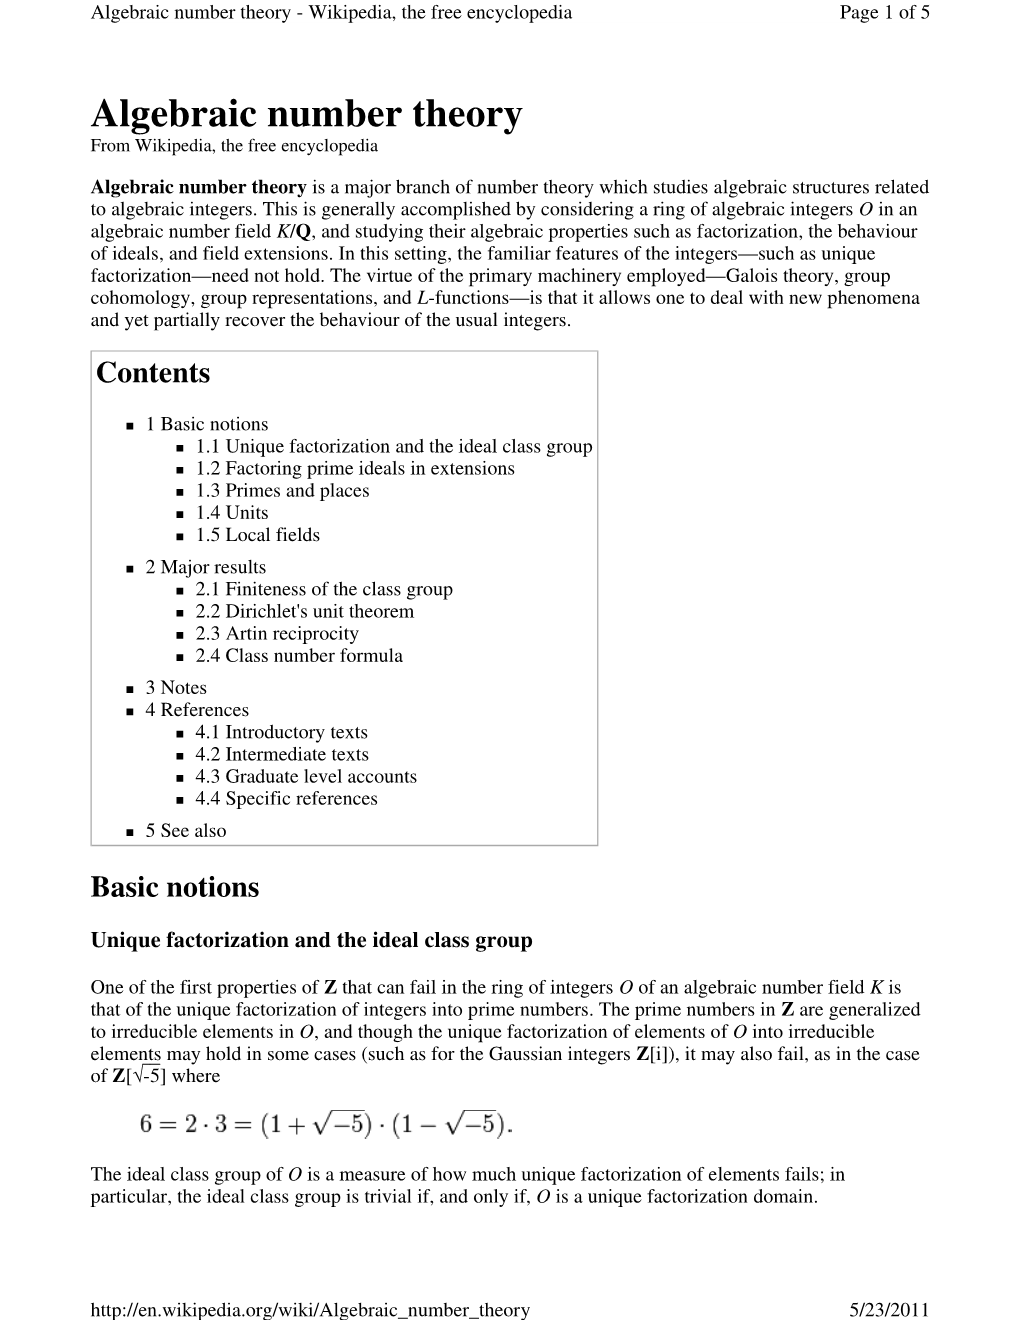 Algebraic Number Theory - Wikipedia, the Free Encyclopedia Page 1 of 5